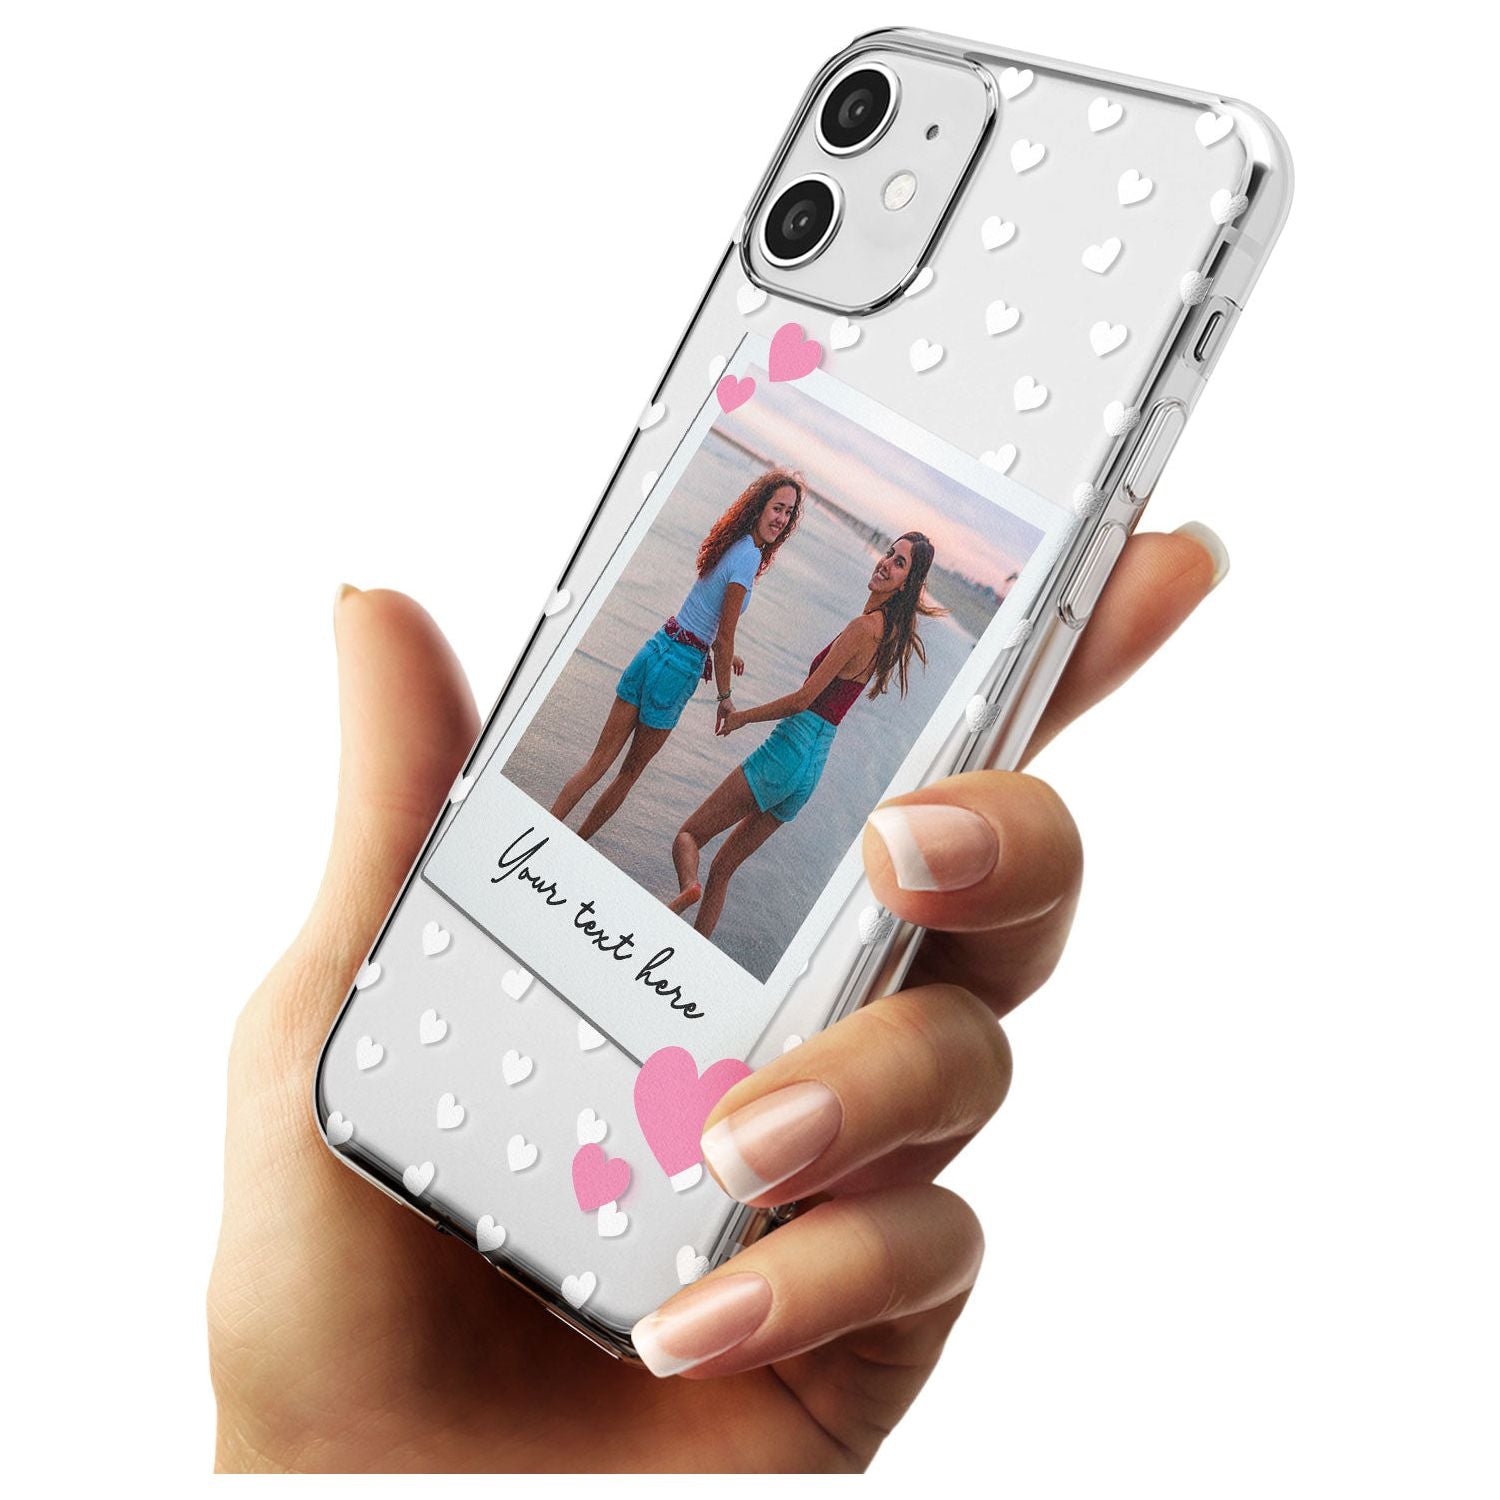 Instant Film & Hearts Black Impact Phone Case for iPhone 11